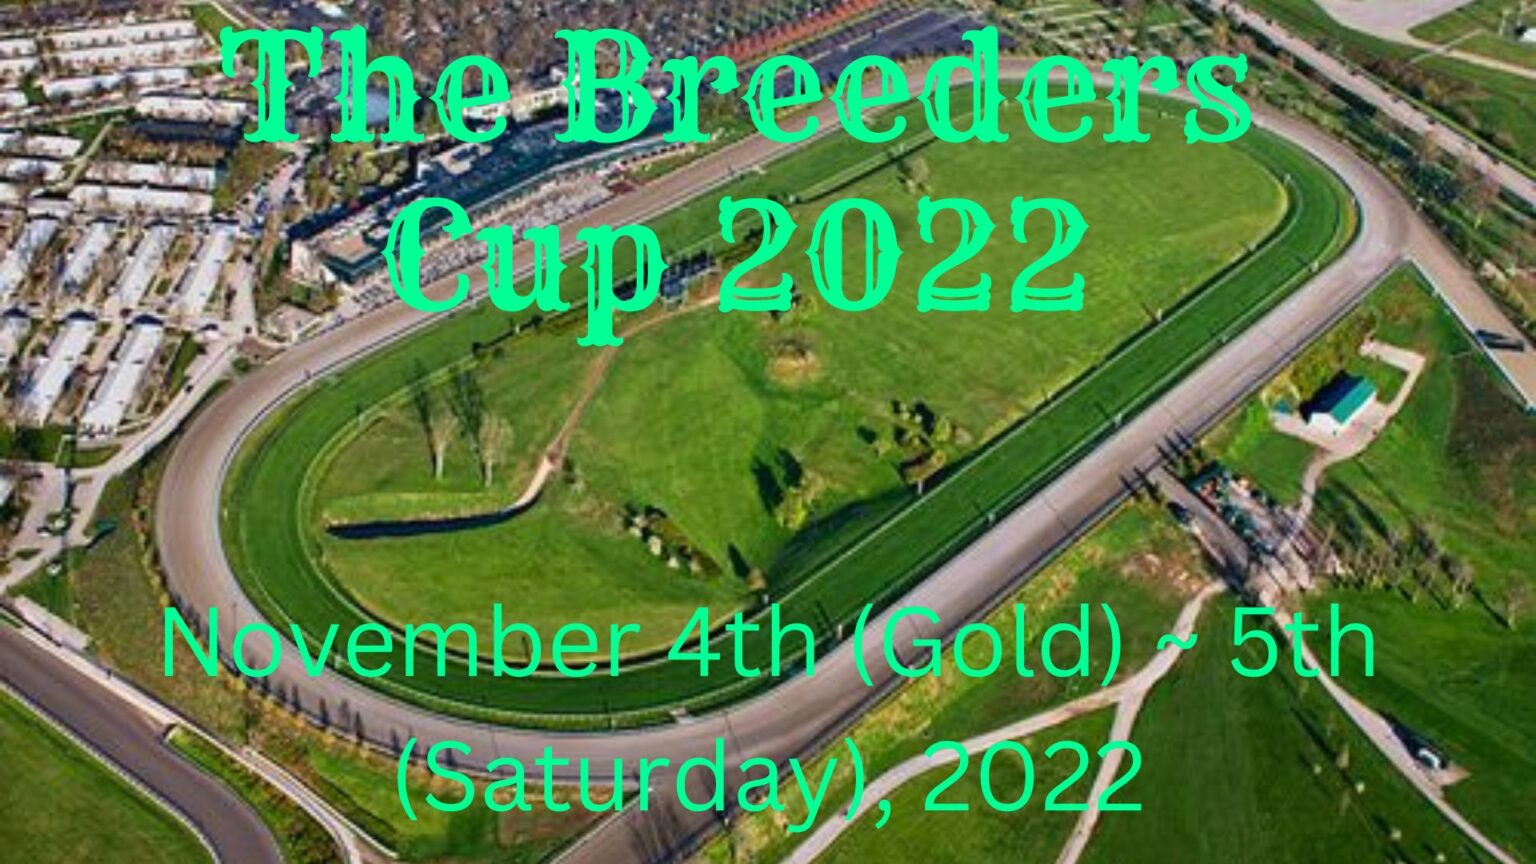 Breeders Cup 2022 Schedule, Start Time, Prize Money, Live Stream